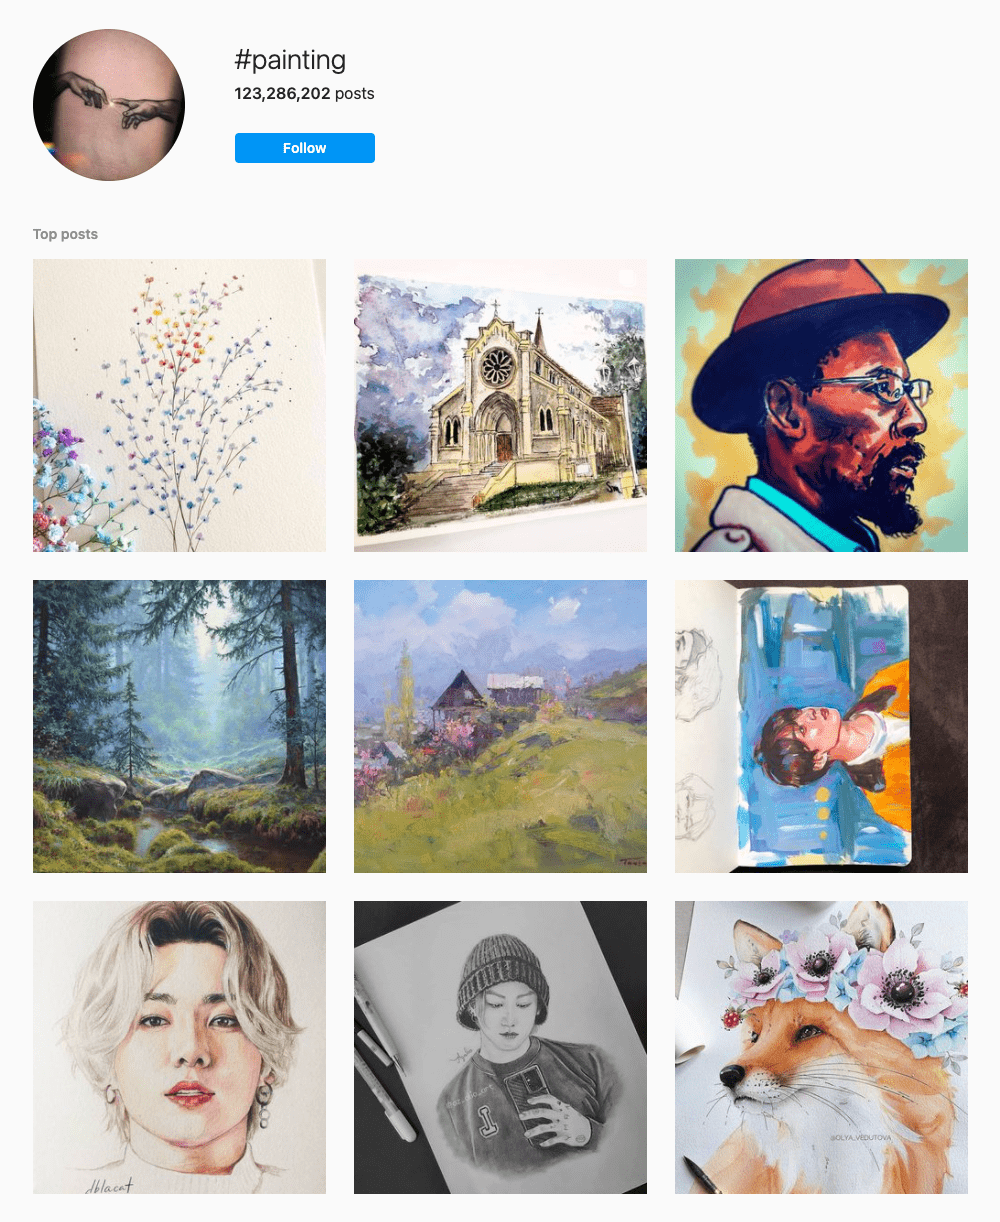 #painting Hashtags for Instagram